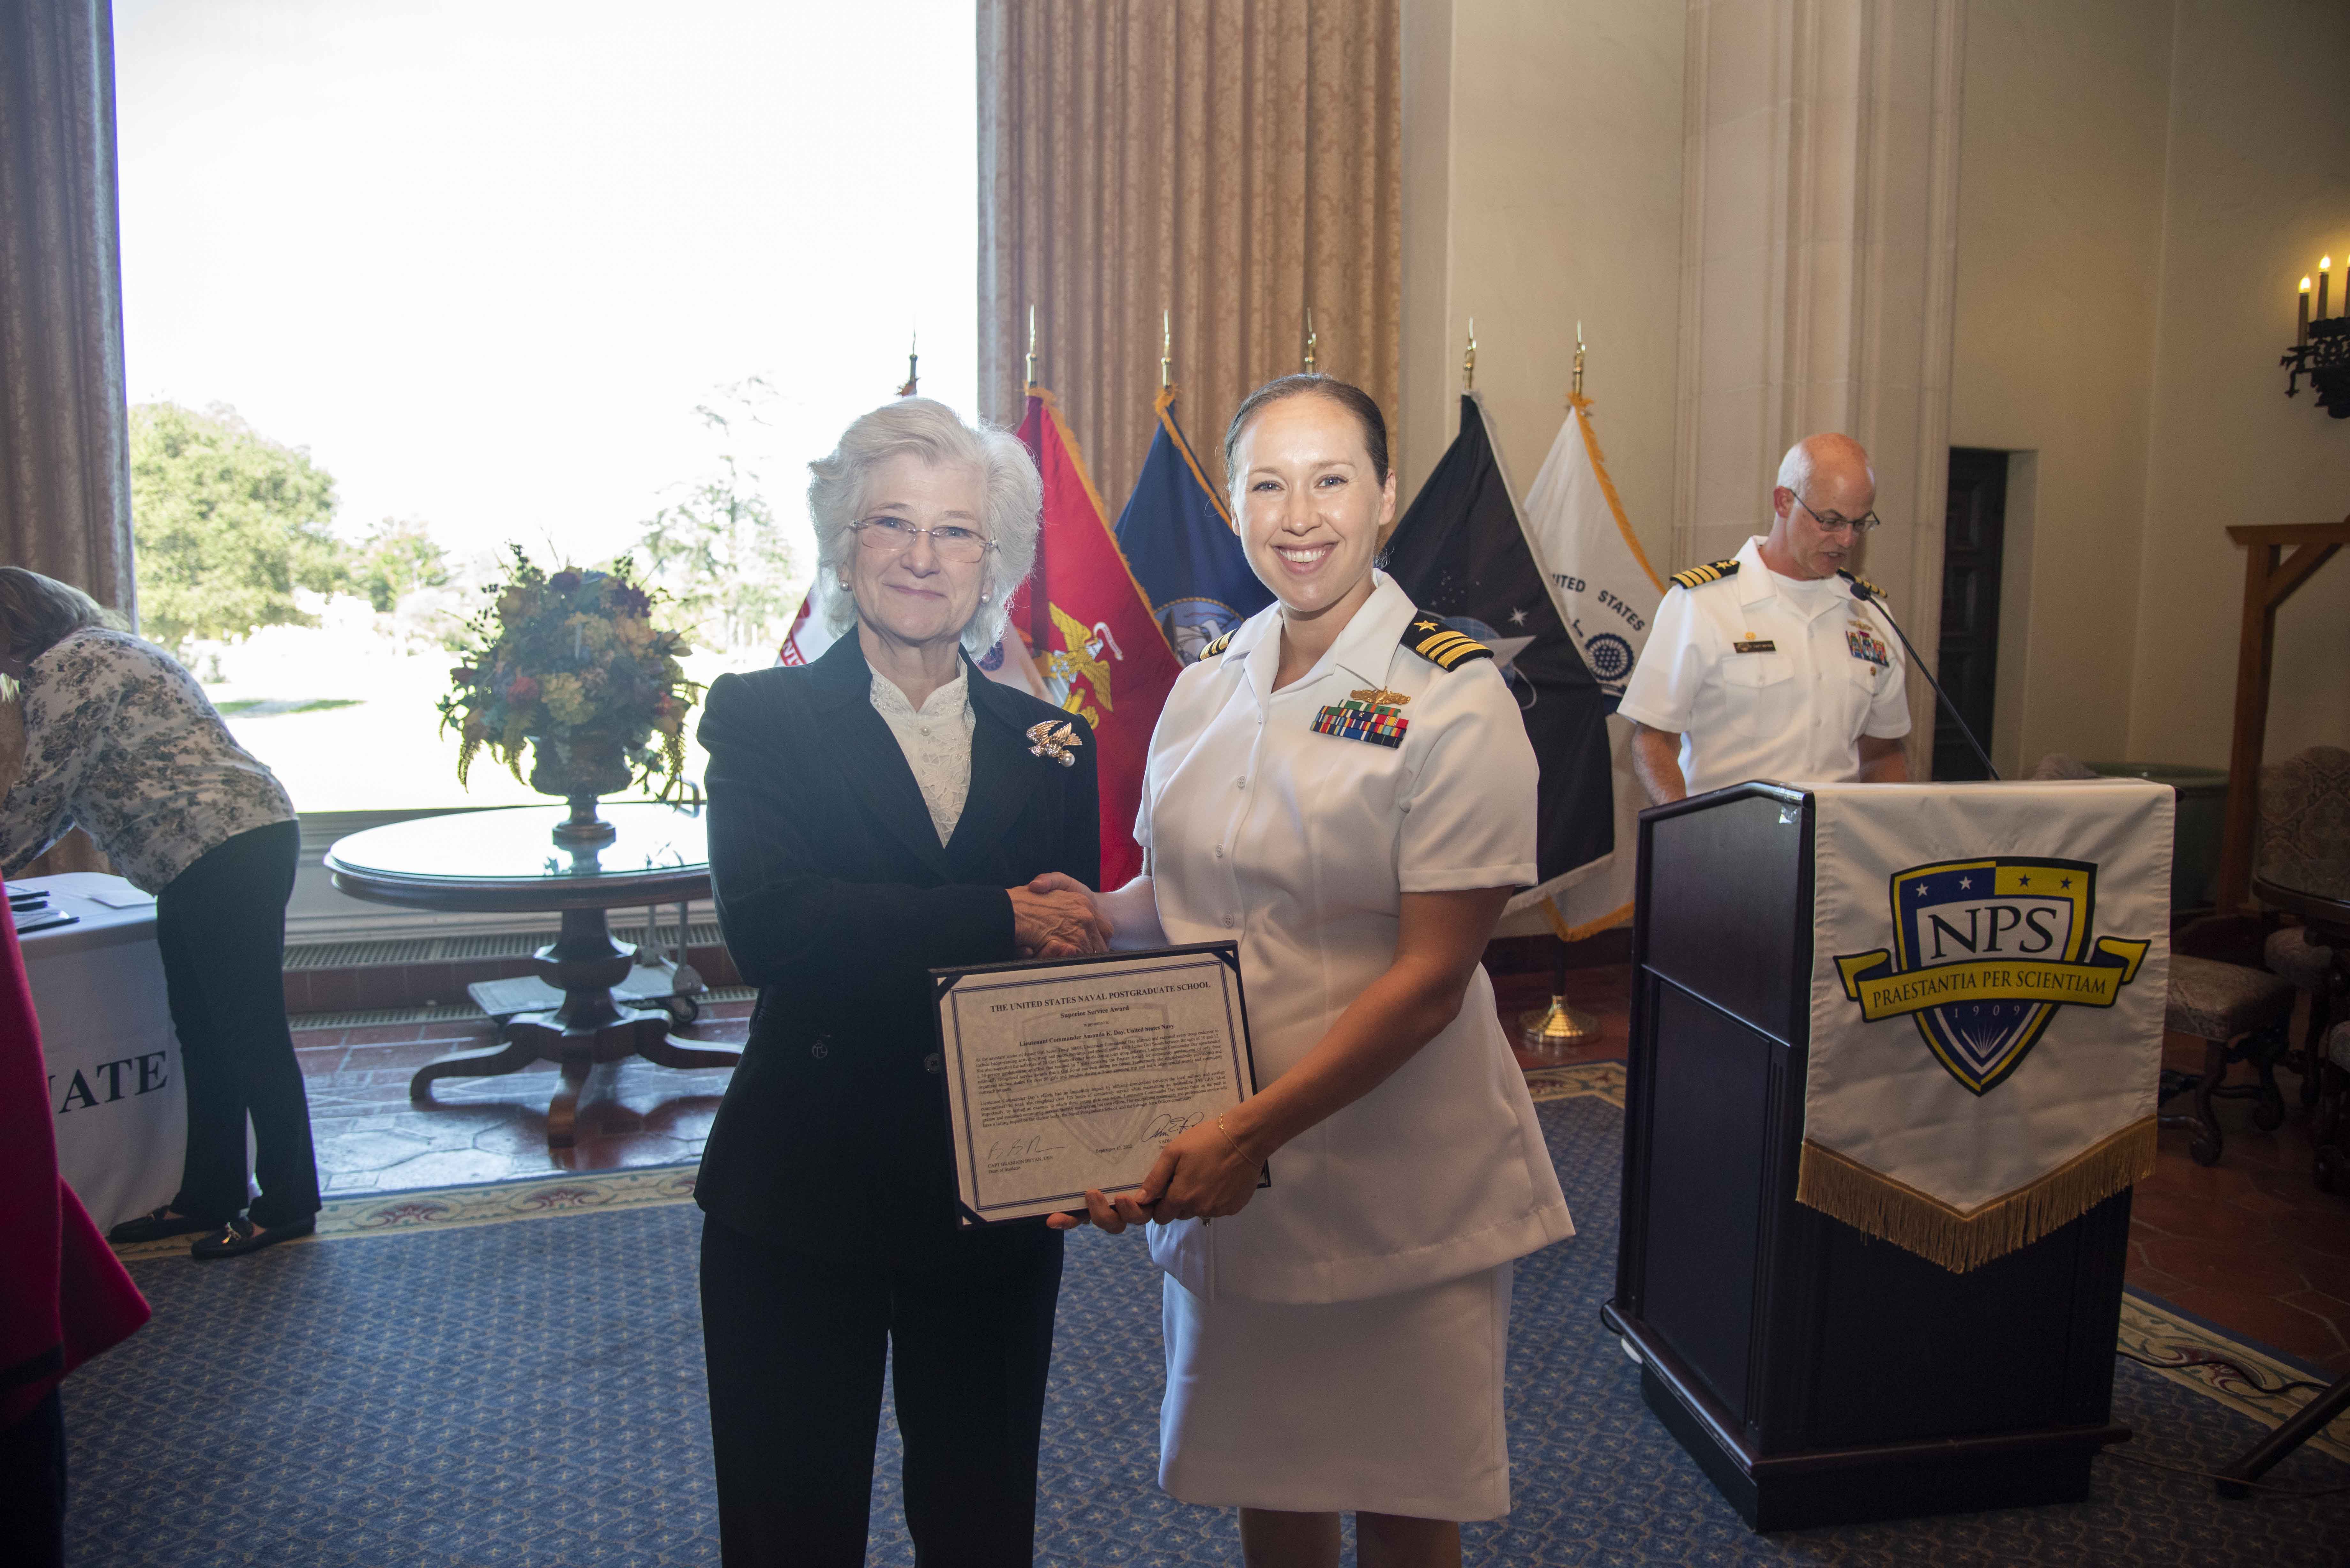 Receiving the award from NPS President VADM Rondeau -- September 2022